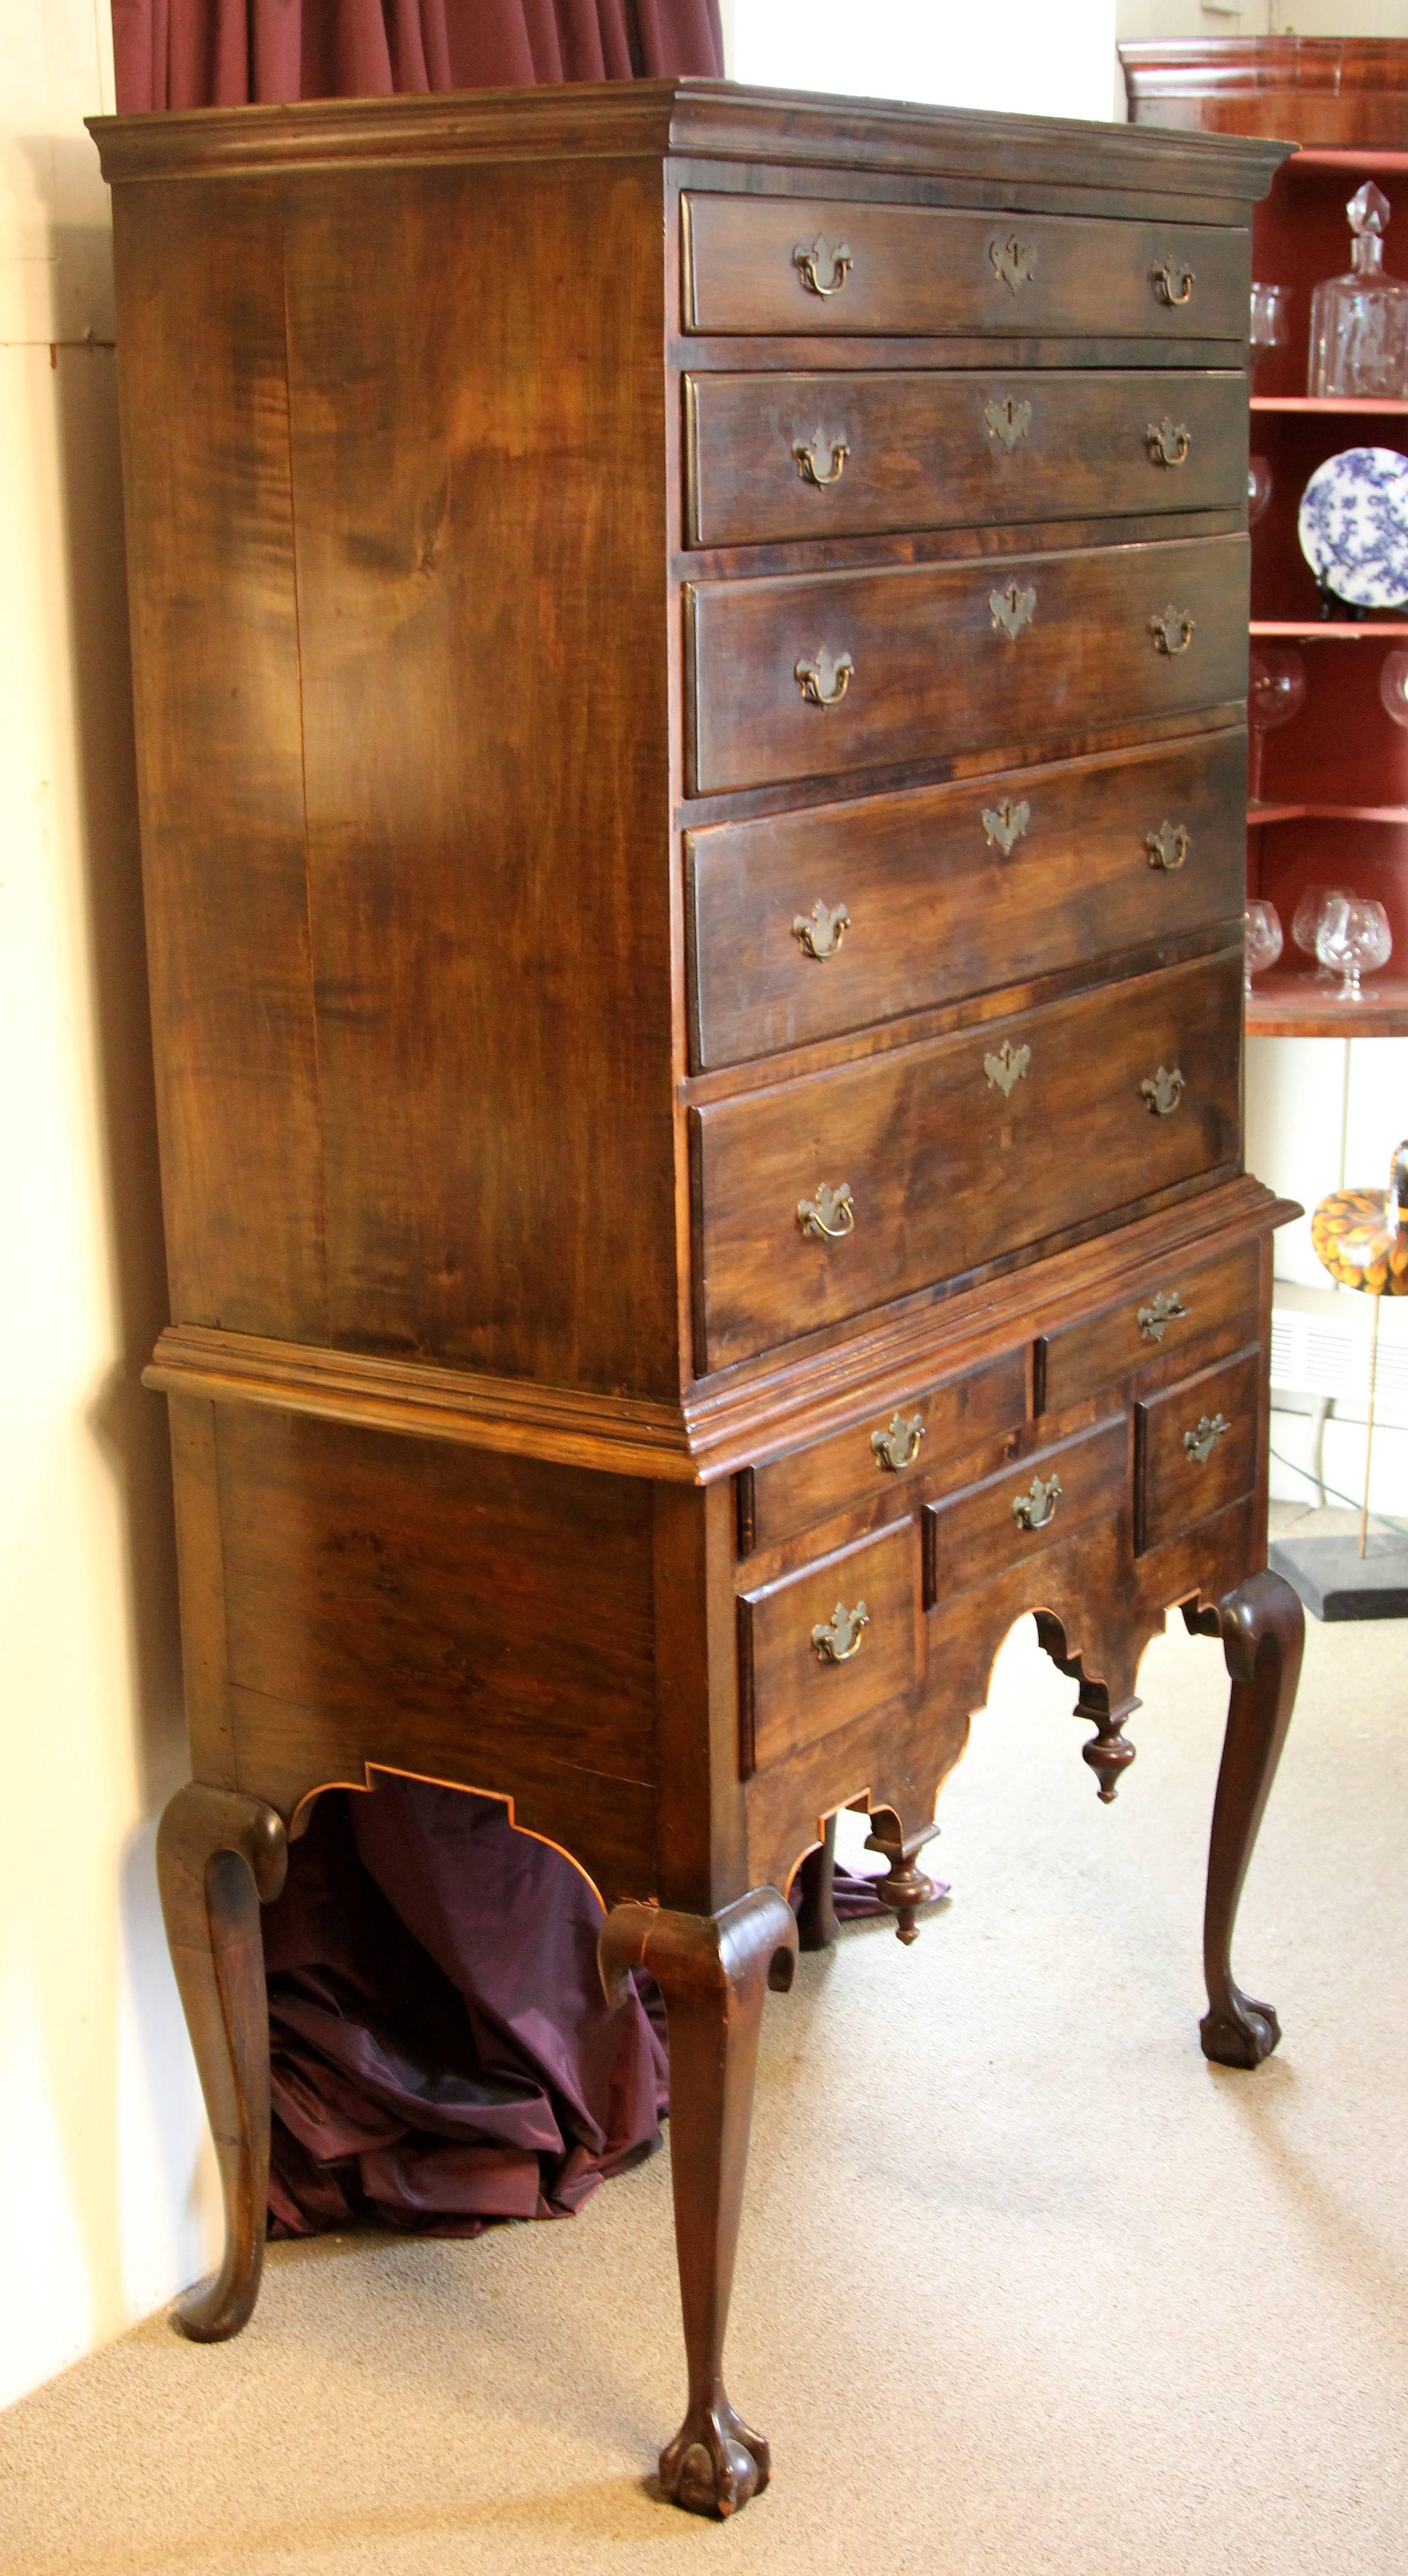 Circa 1725, cabriole legs - period brass pulls  Apron configuration on claw and ball feet.  There are seven rows of dovetailed drawers each open smoothly.